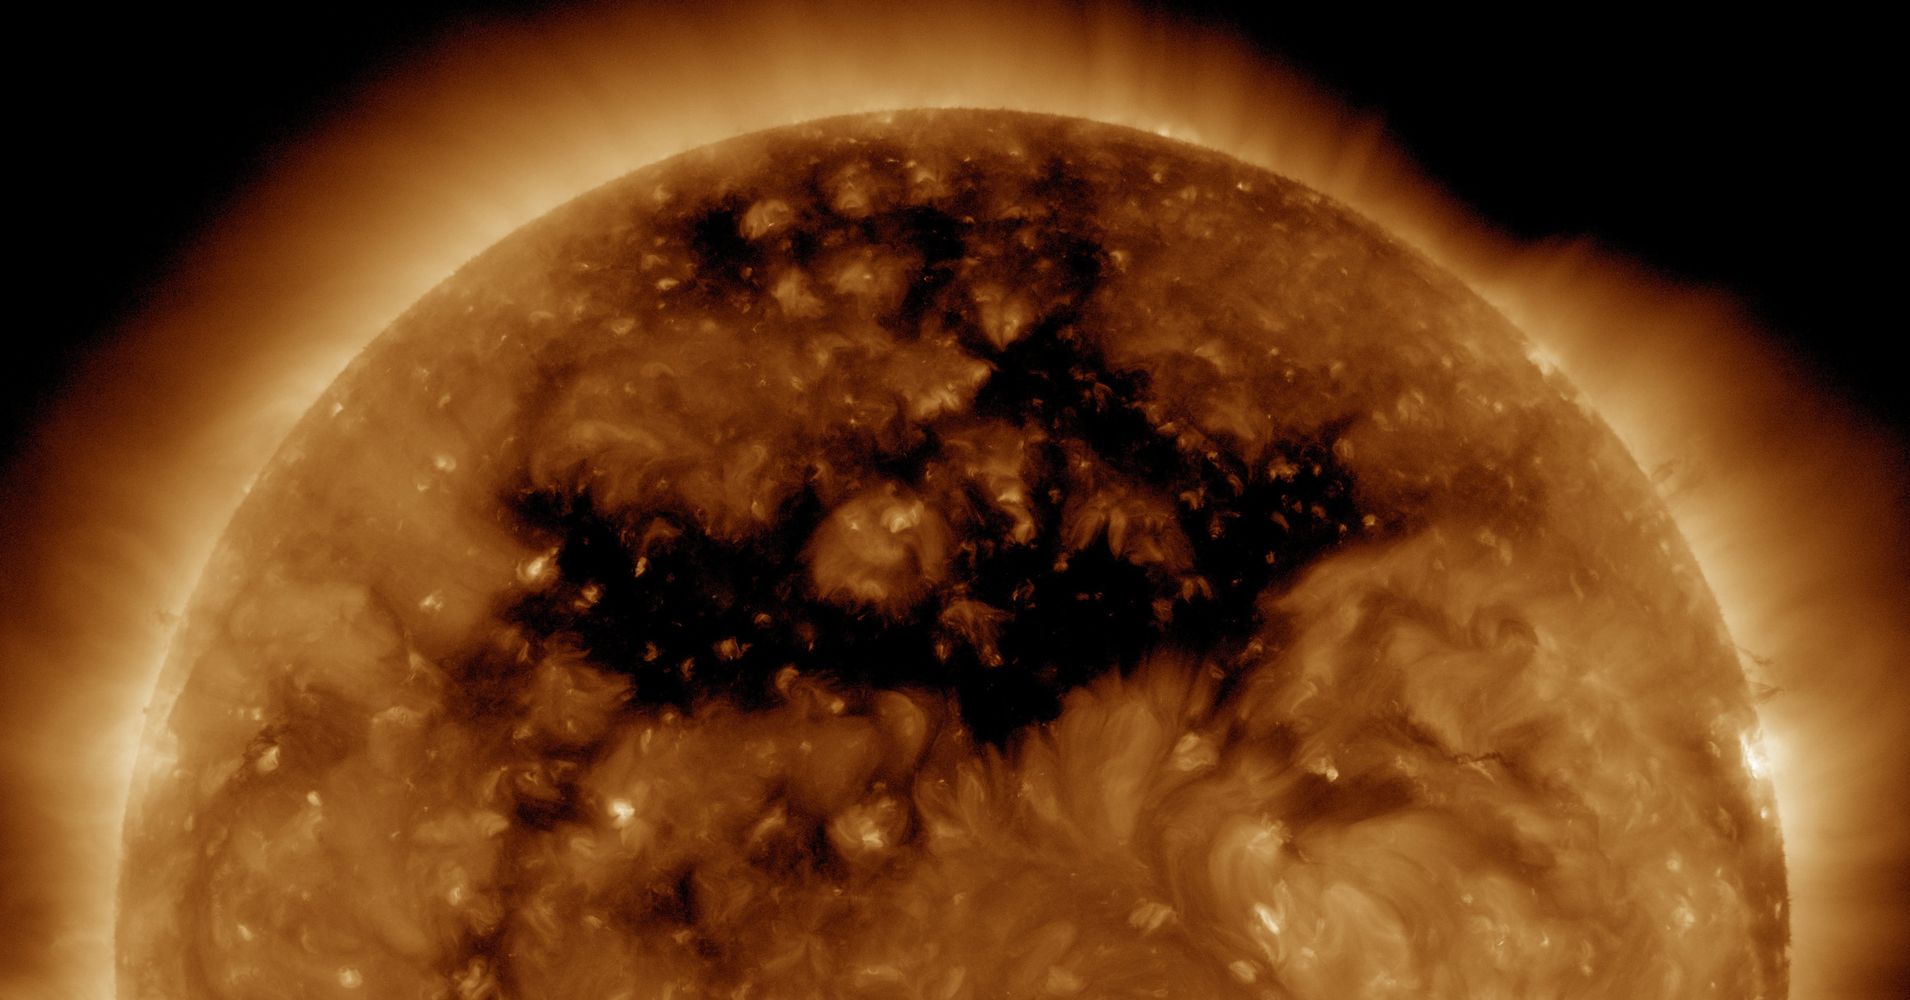 There's A Huge 'Hole' In The Sun And This Is What It Looks Like HuffPost